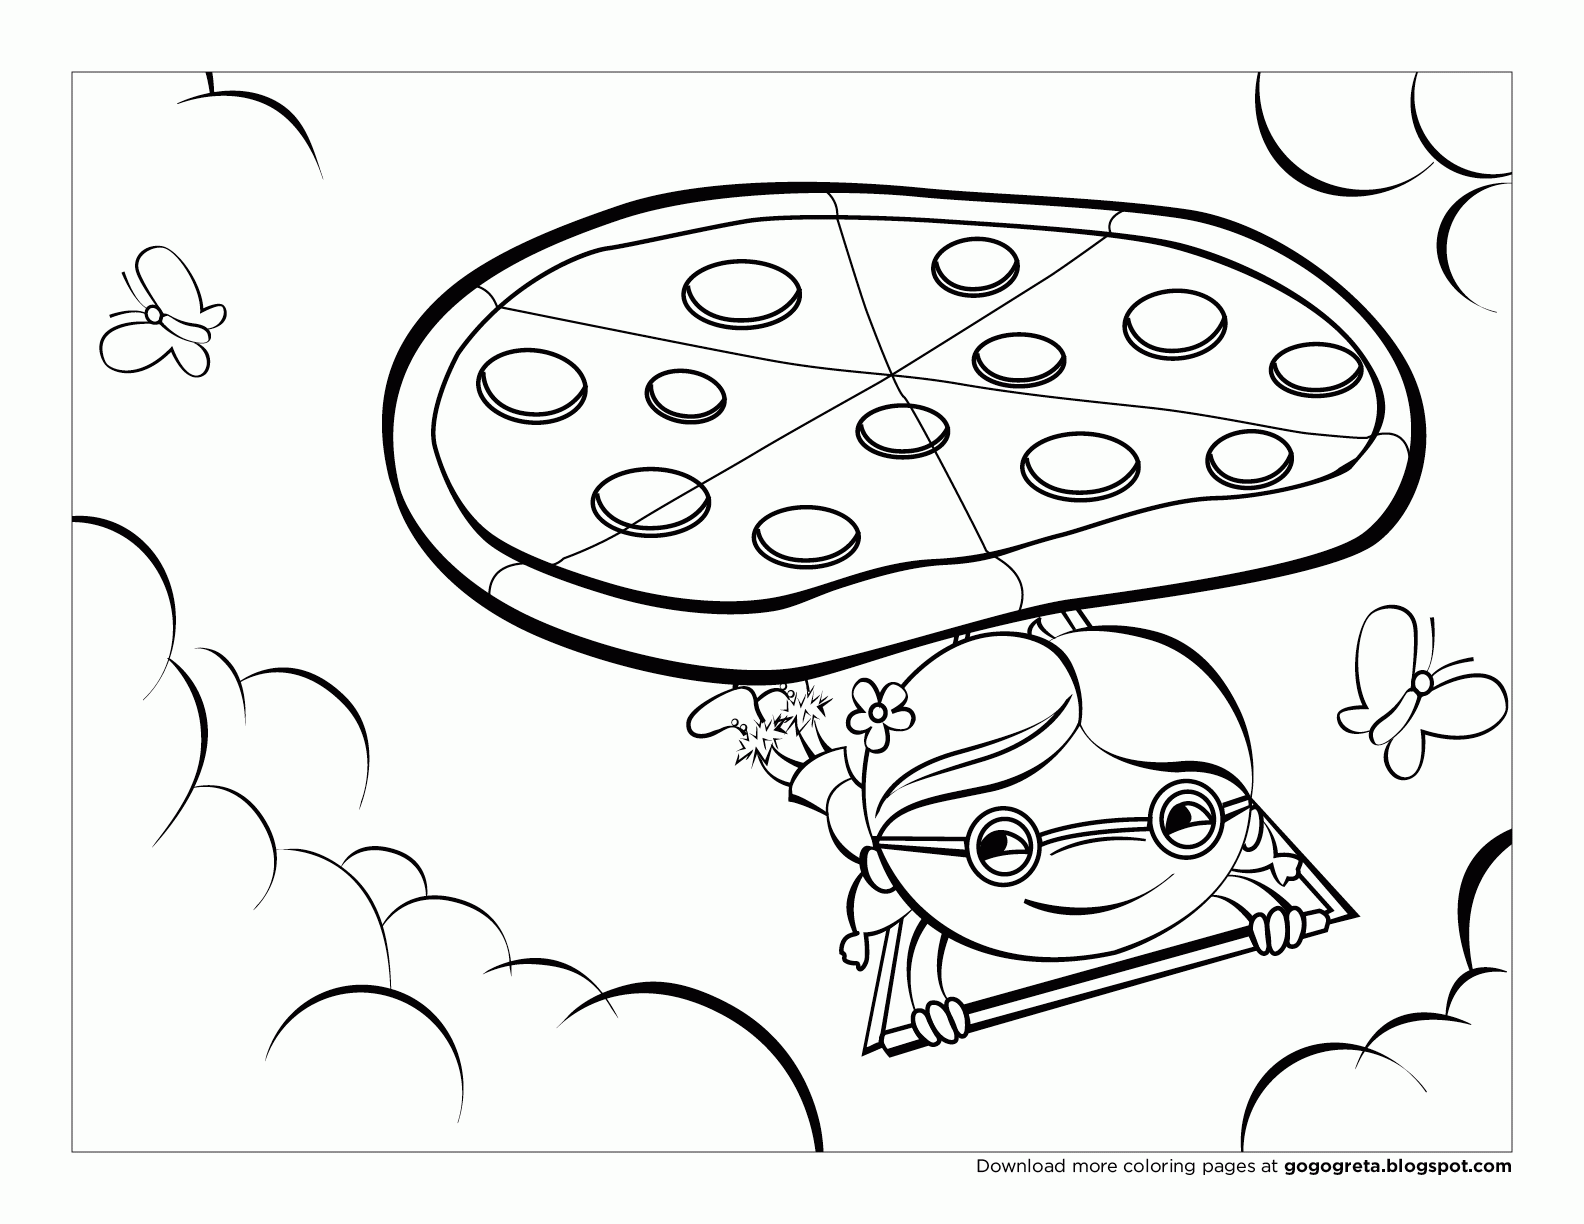 pizza-coloring-pages-kids-printable-coloring-pages-38-free